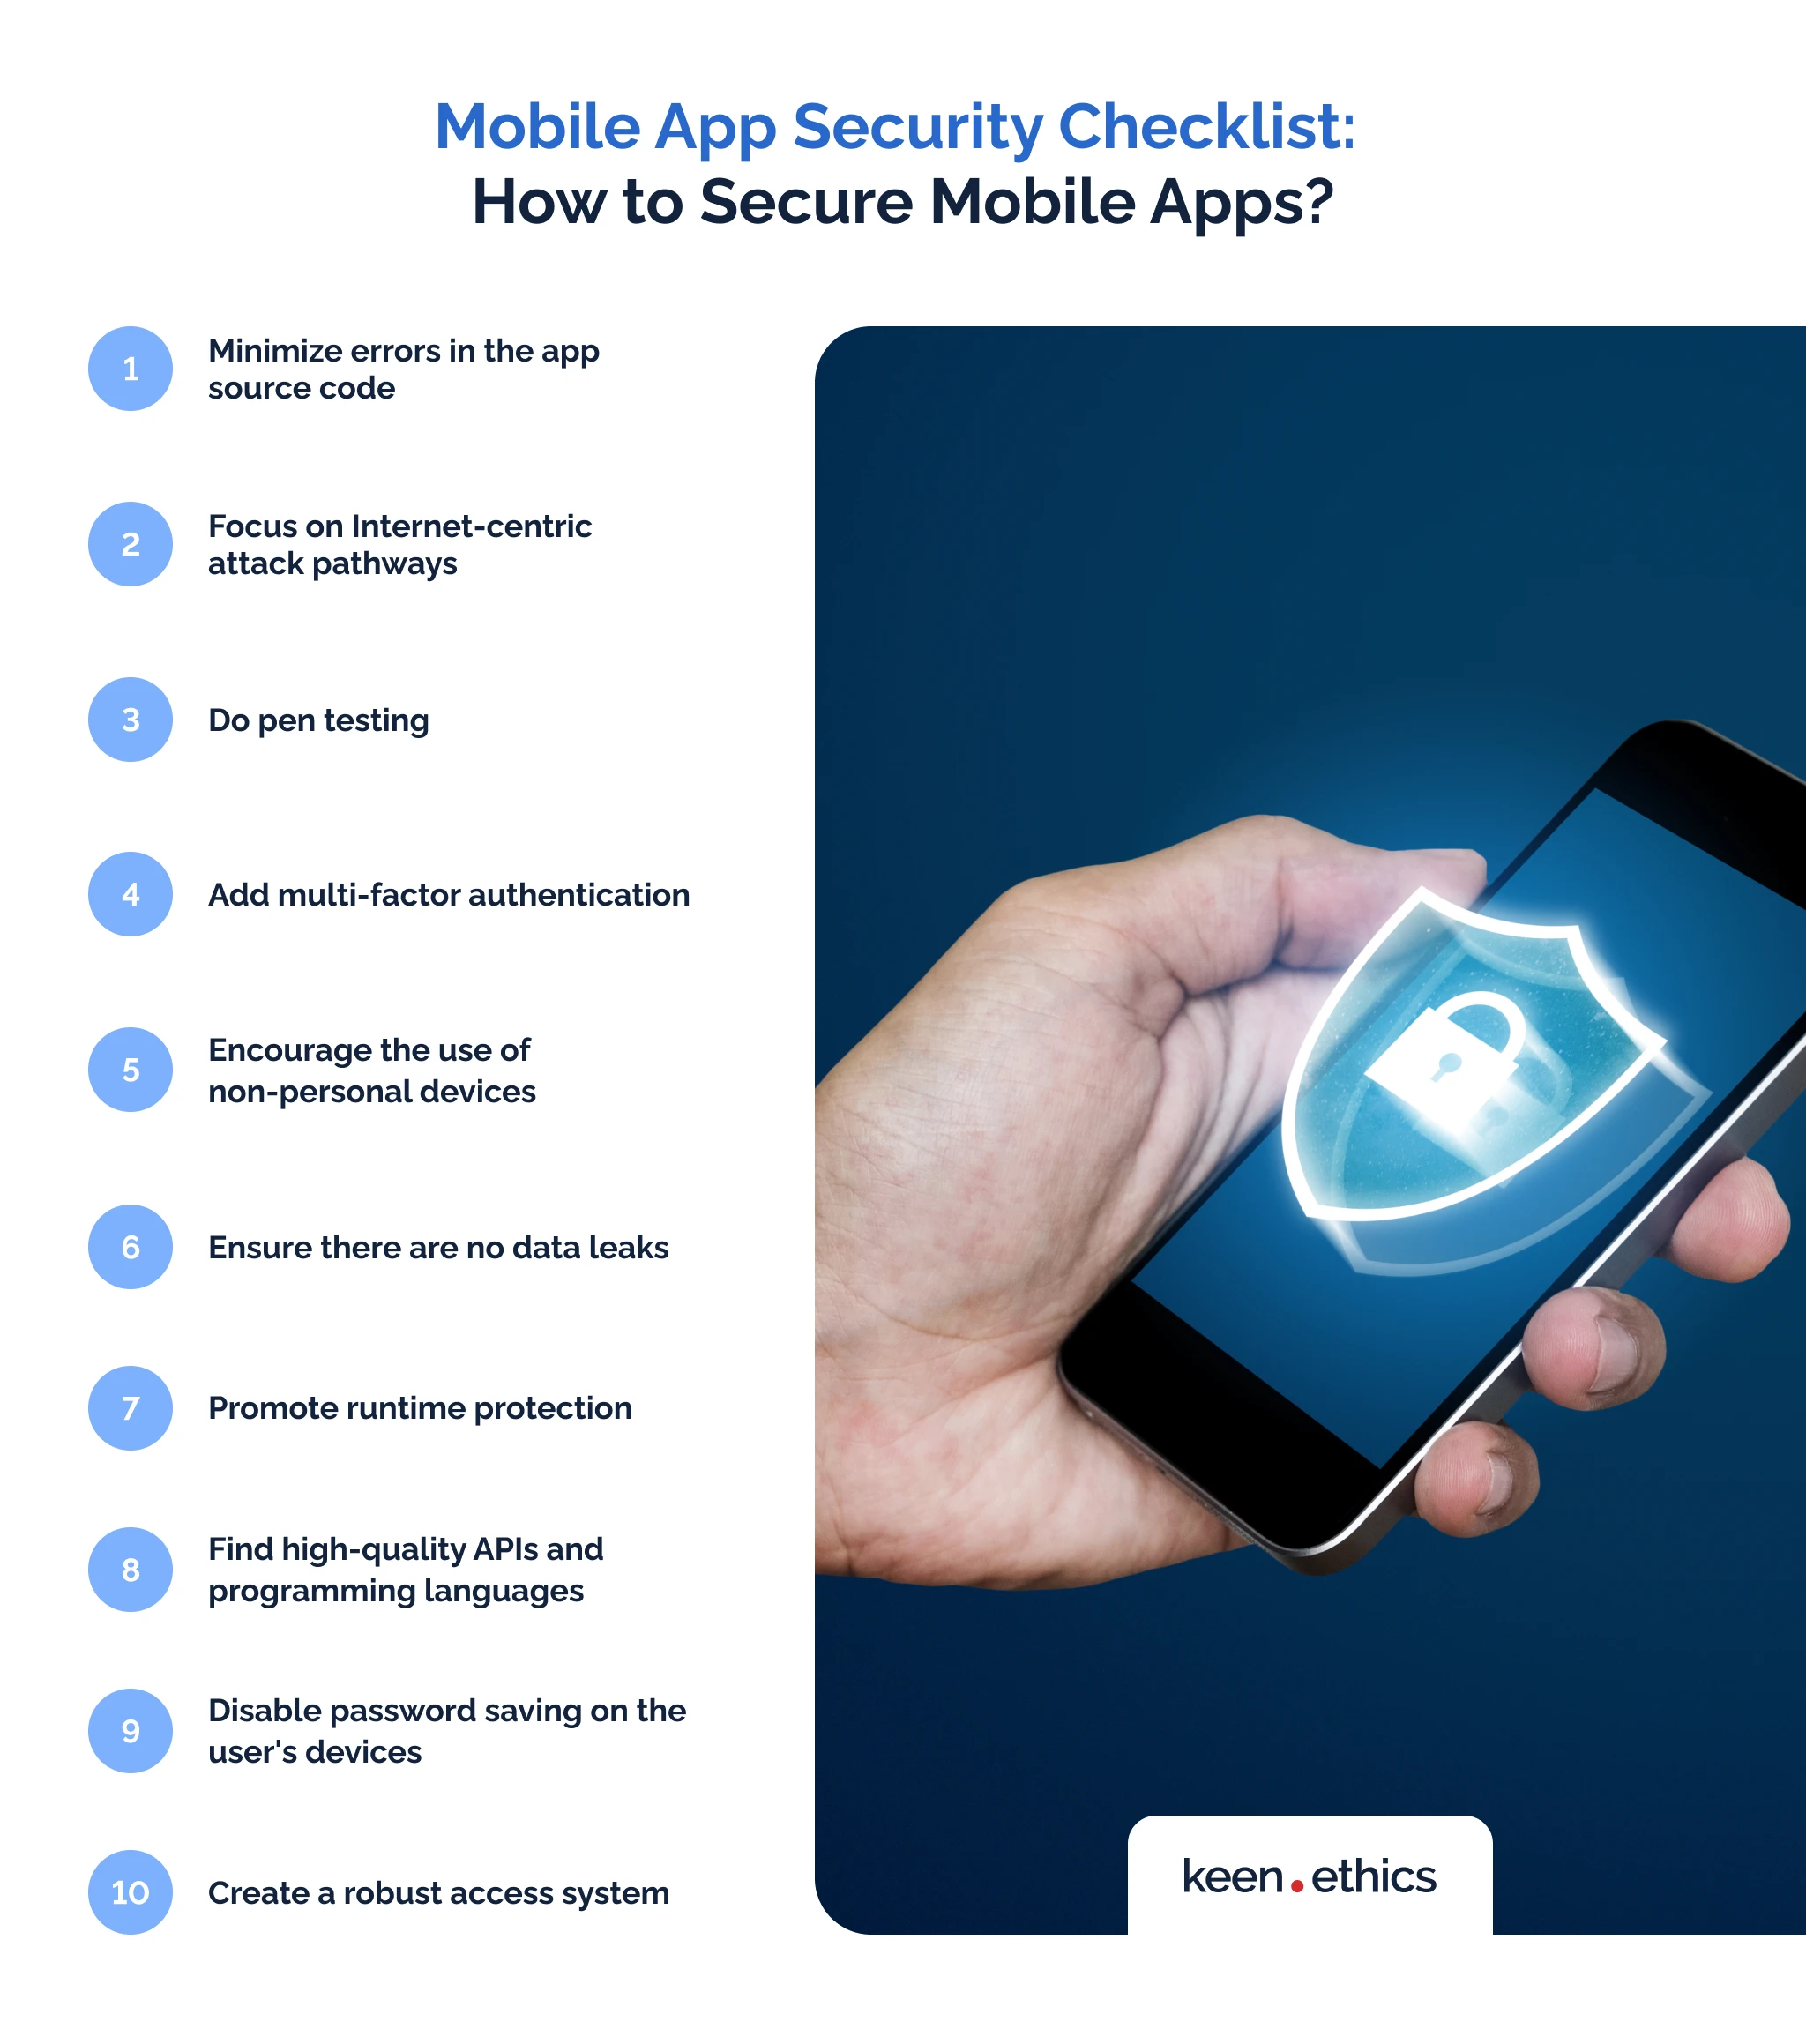 Mobile app security checklist: How to secure mobile apps?